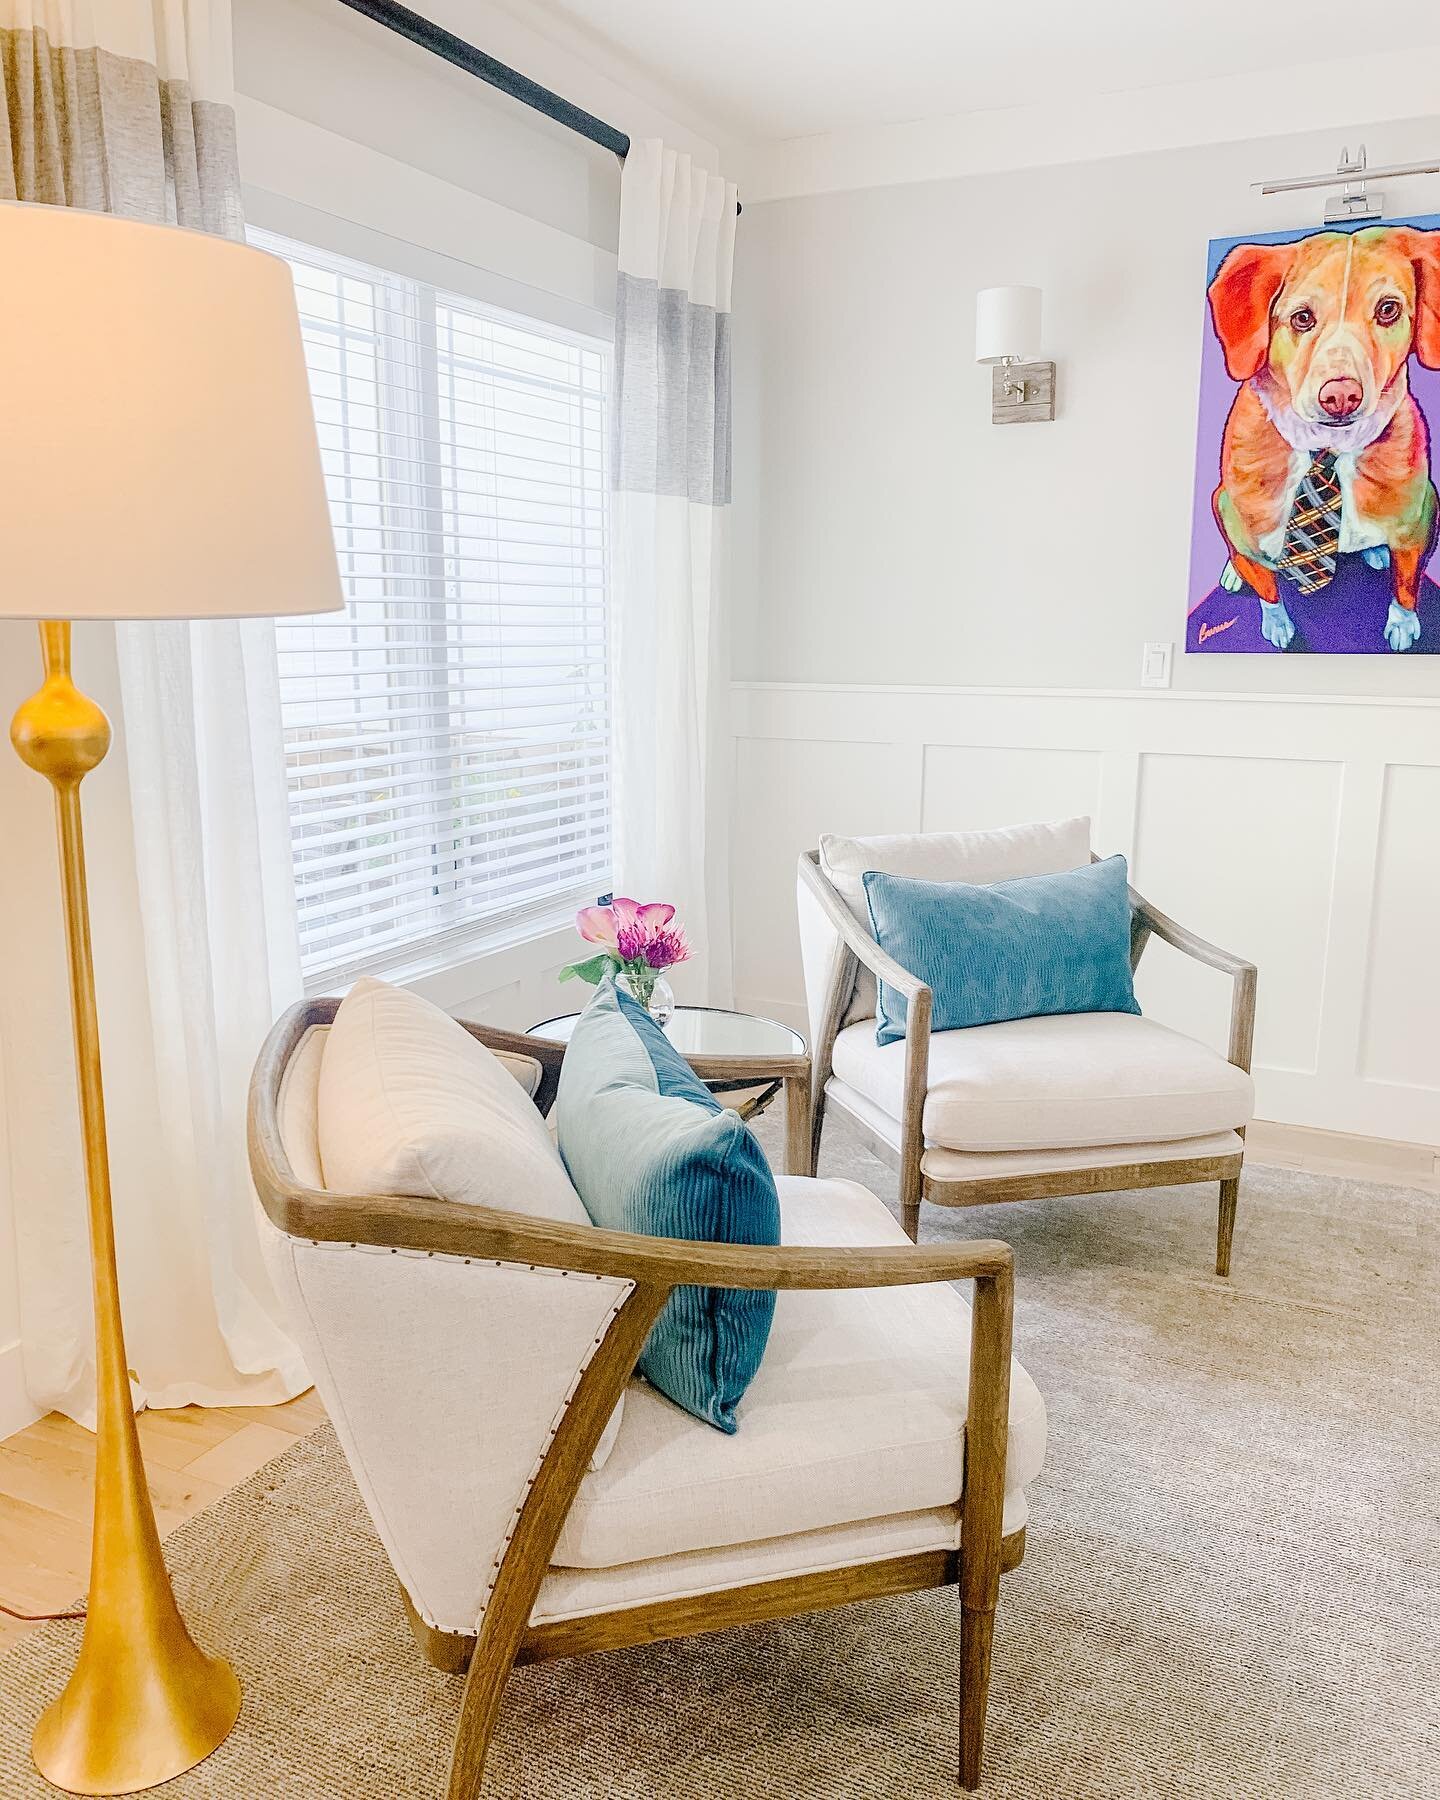 Home is where the dog is. We love artwork if our furry friends💛🐾 #camillacavandesign